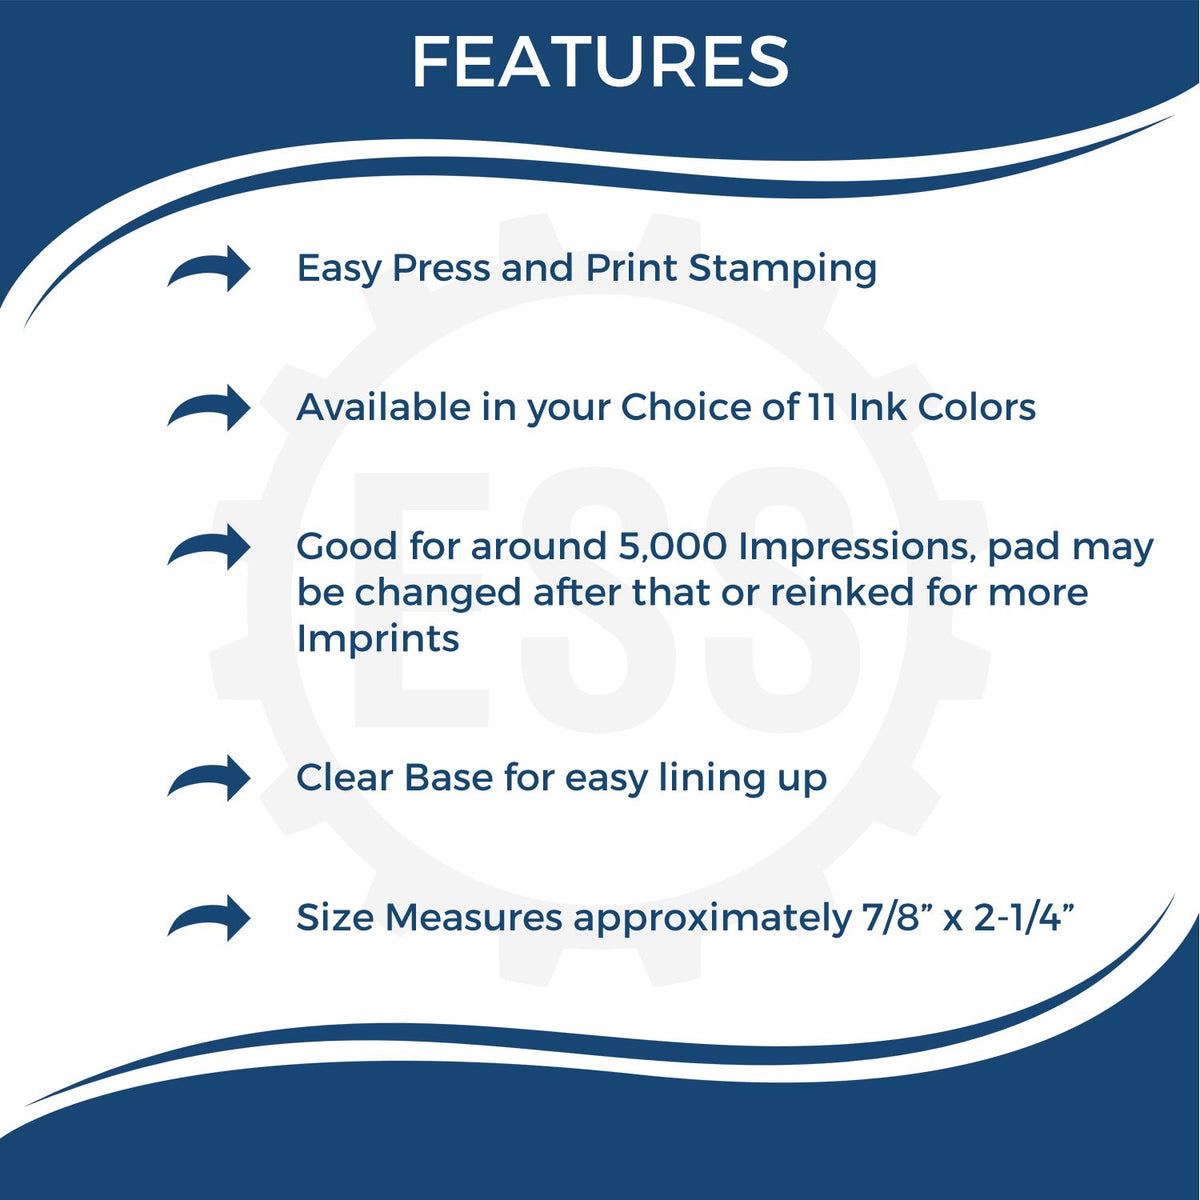 Large Self Inking Copia Stamp